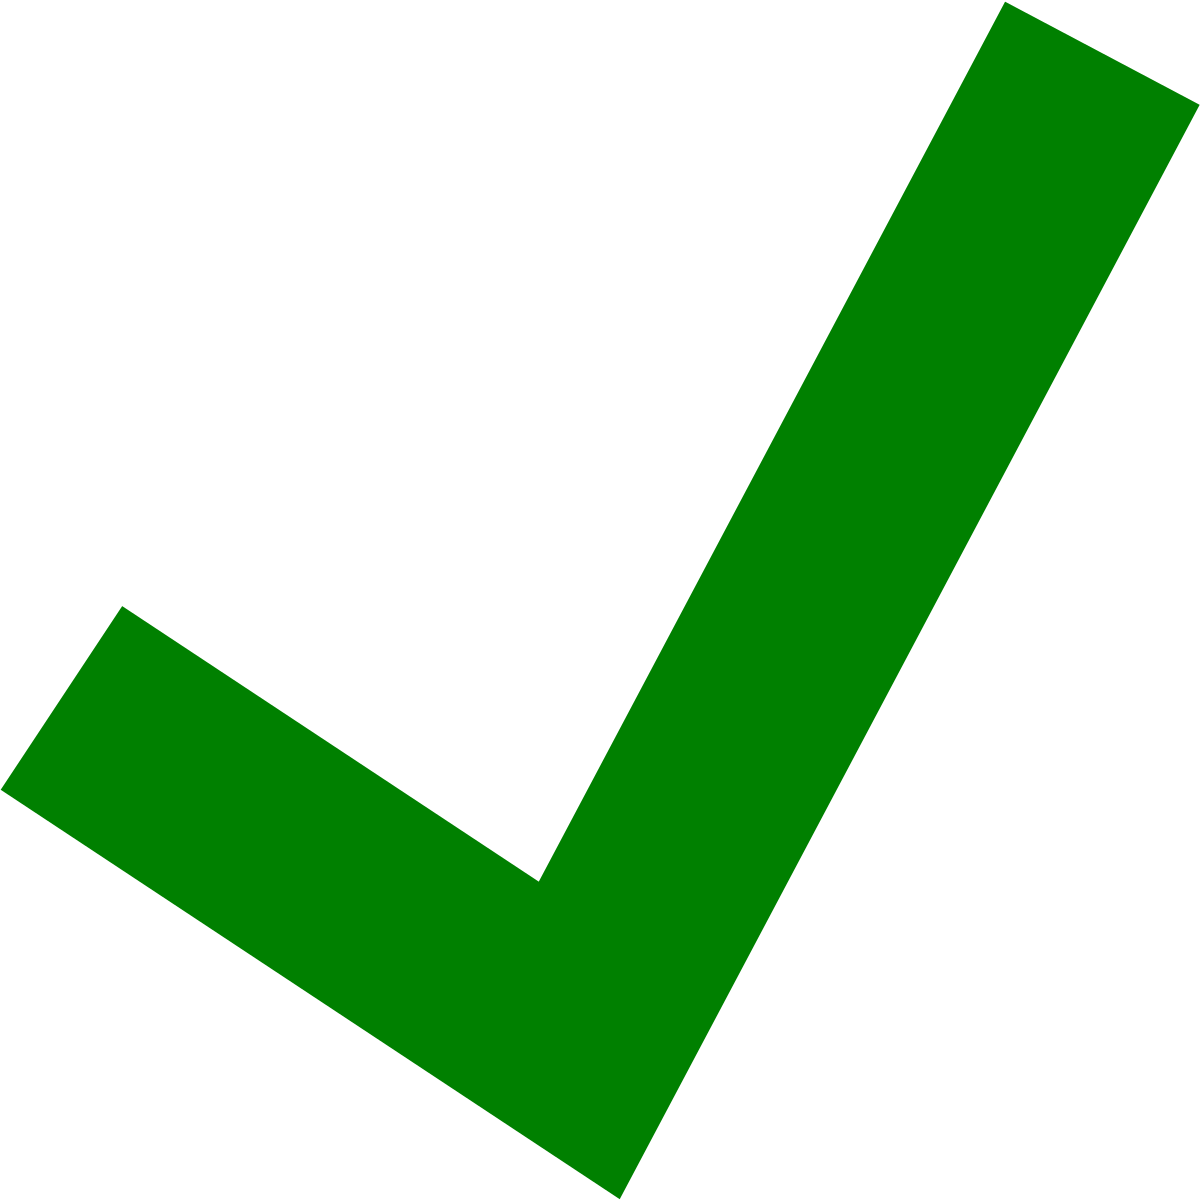 Green Tick Vector PNG Image